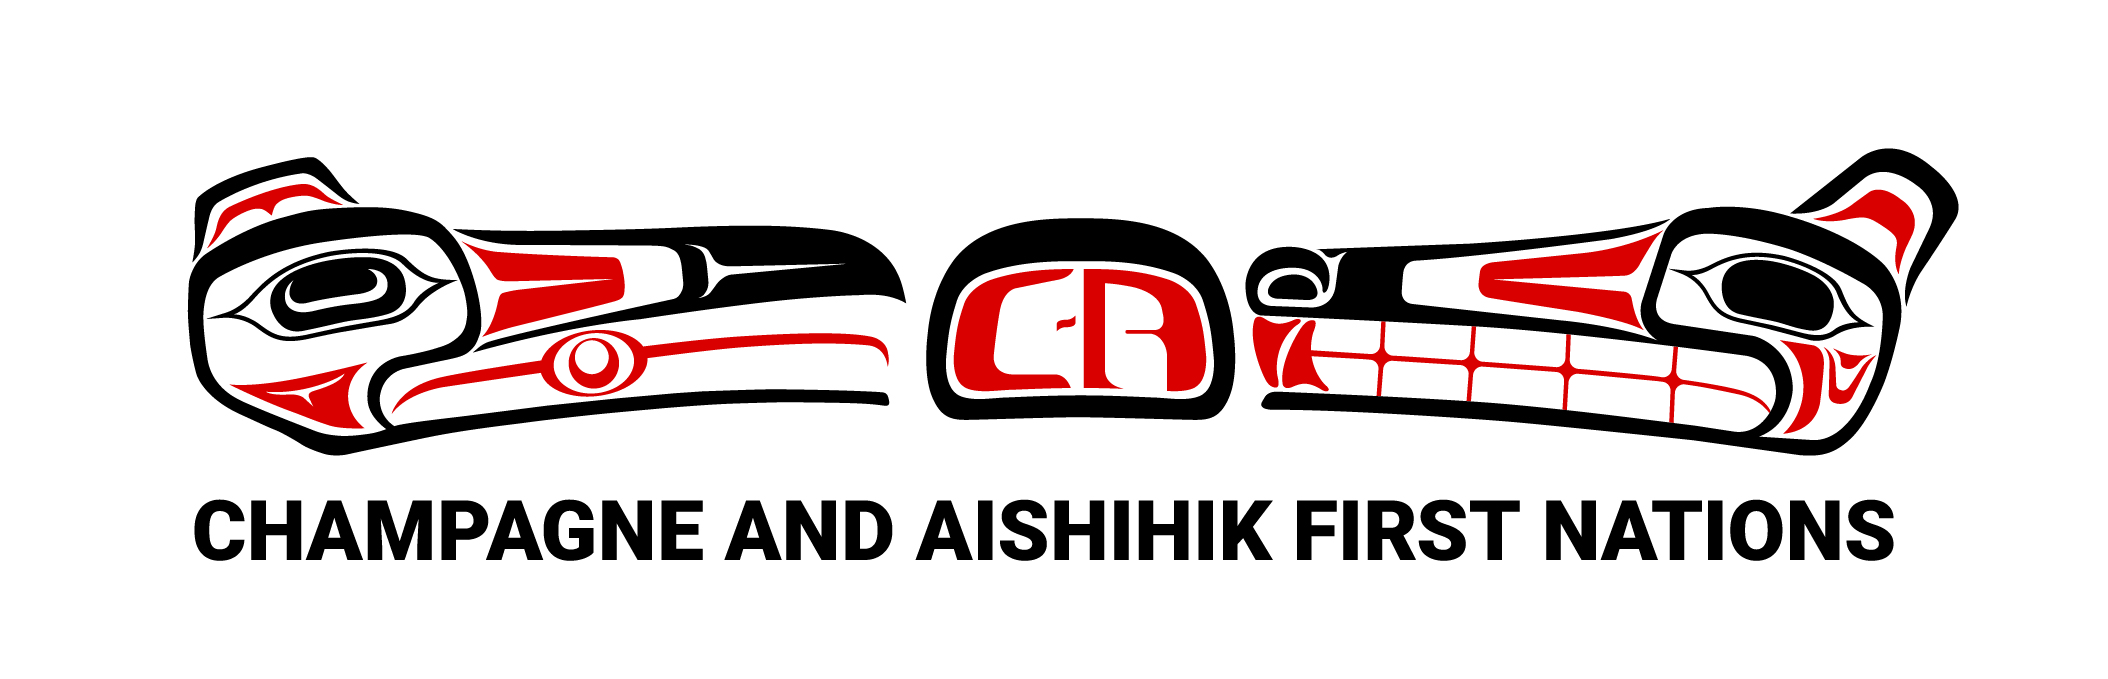 Champagne and Aishihik First Nations logo